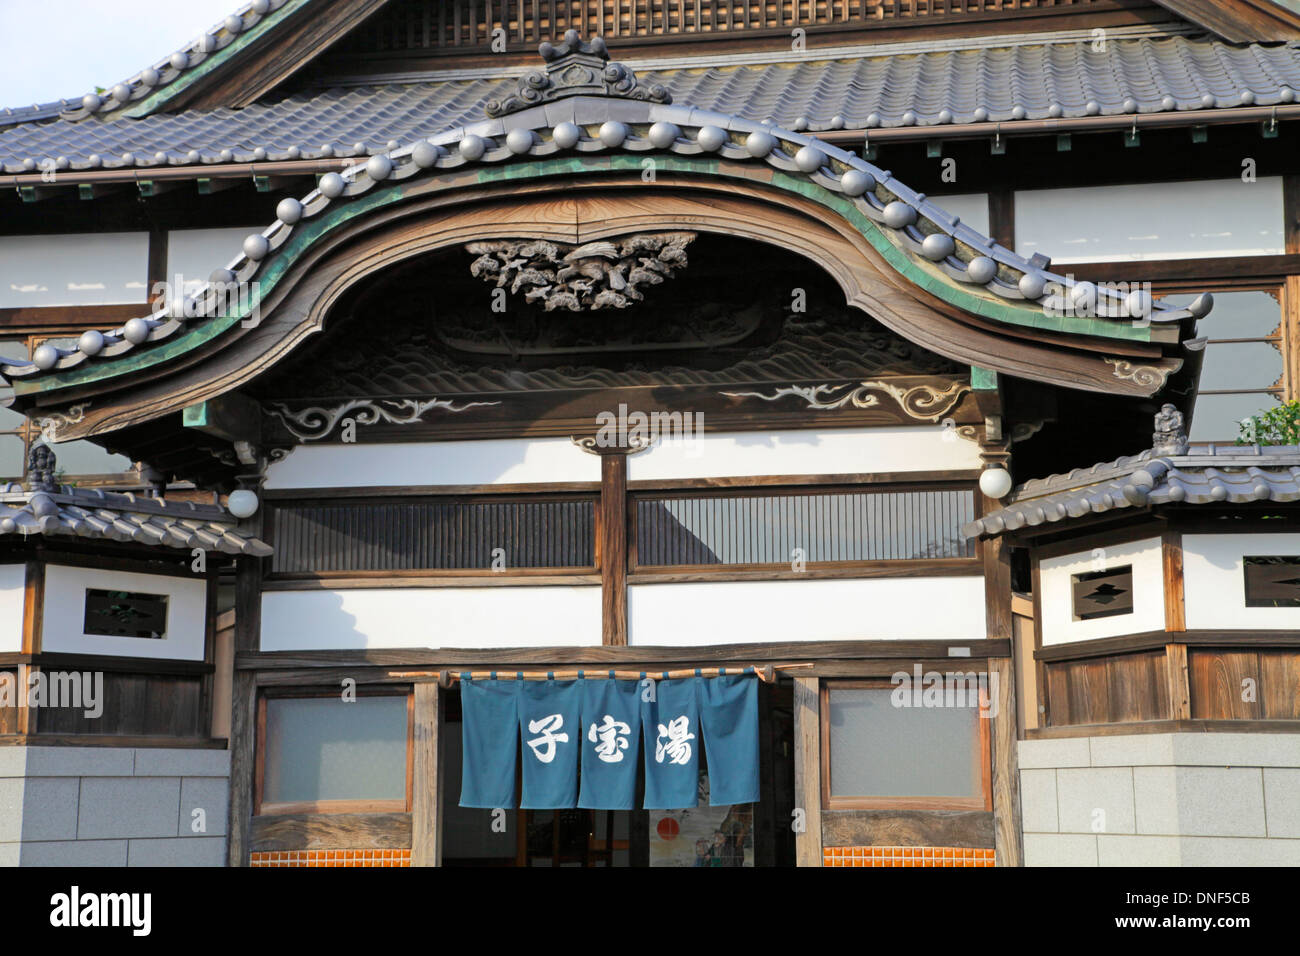 Front entrance of Sento Japanese Bath House at Edo -Tokyo Open Air Architectural Museum Stock Photo